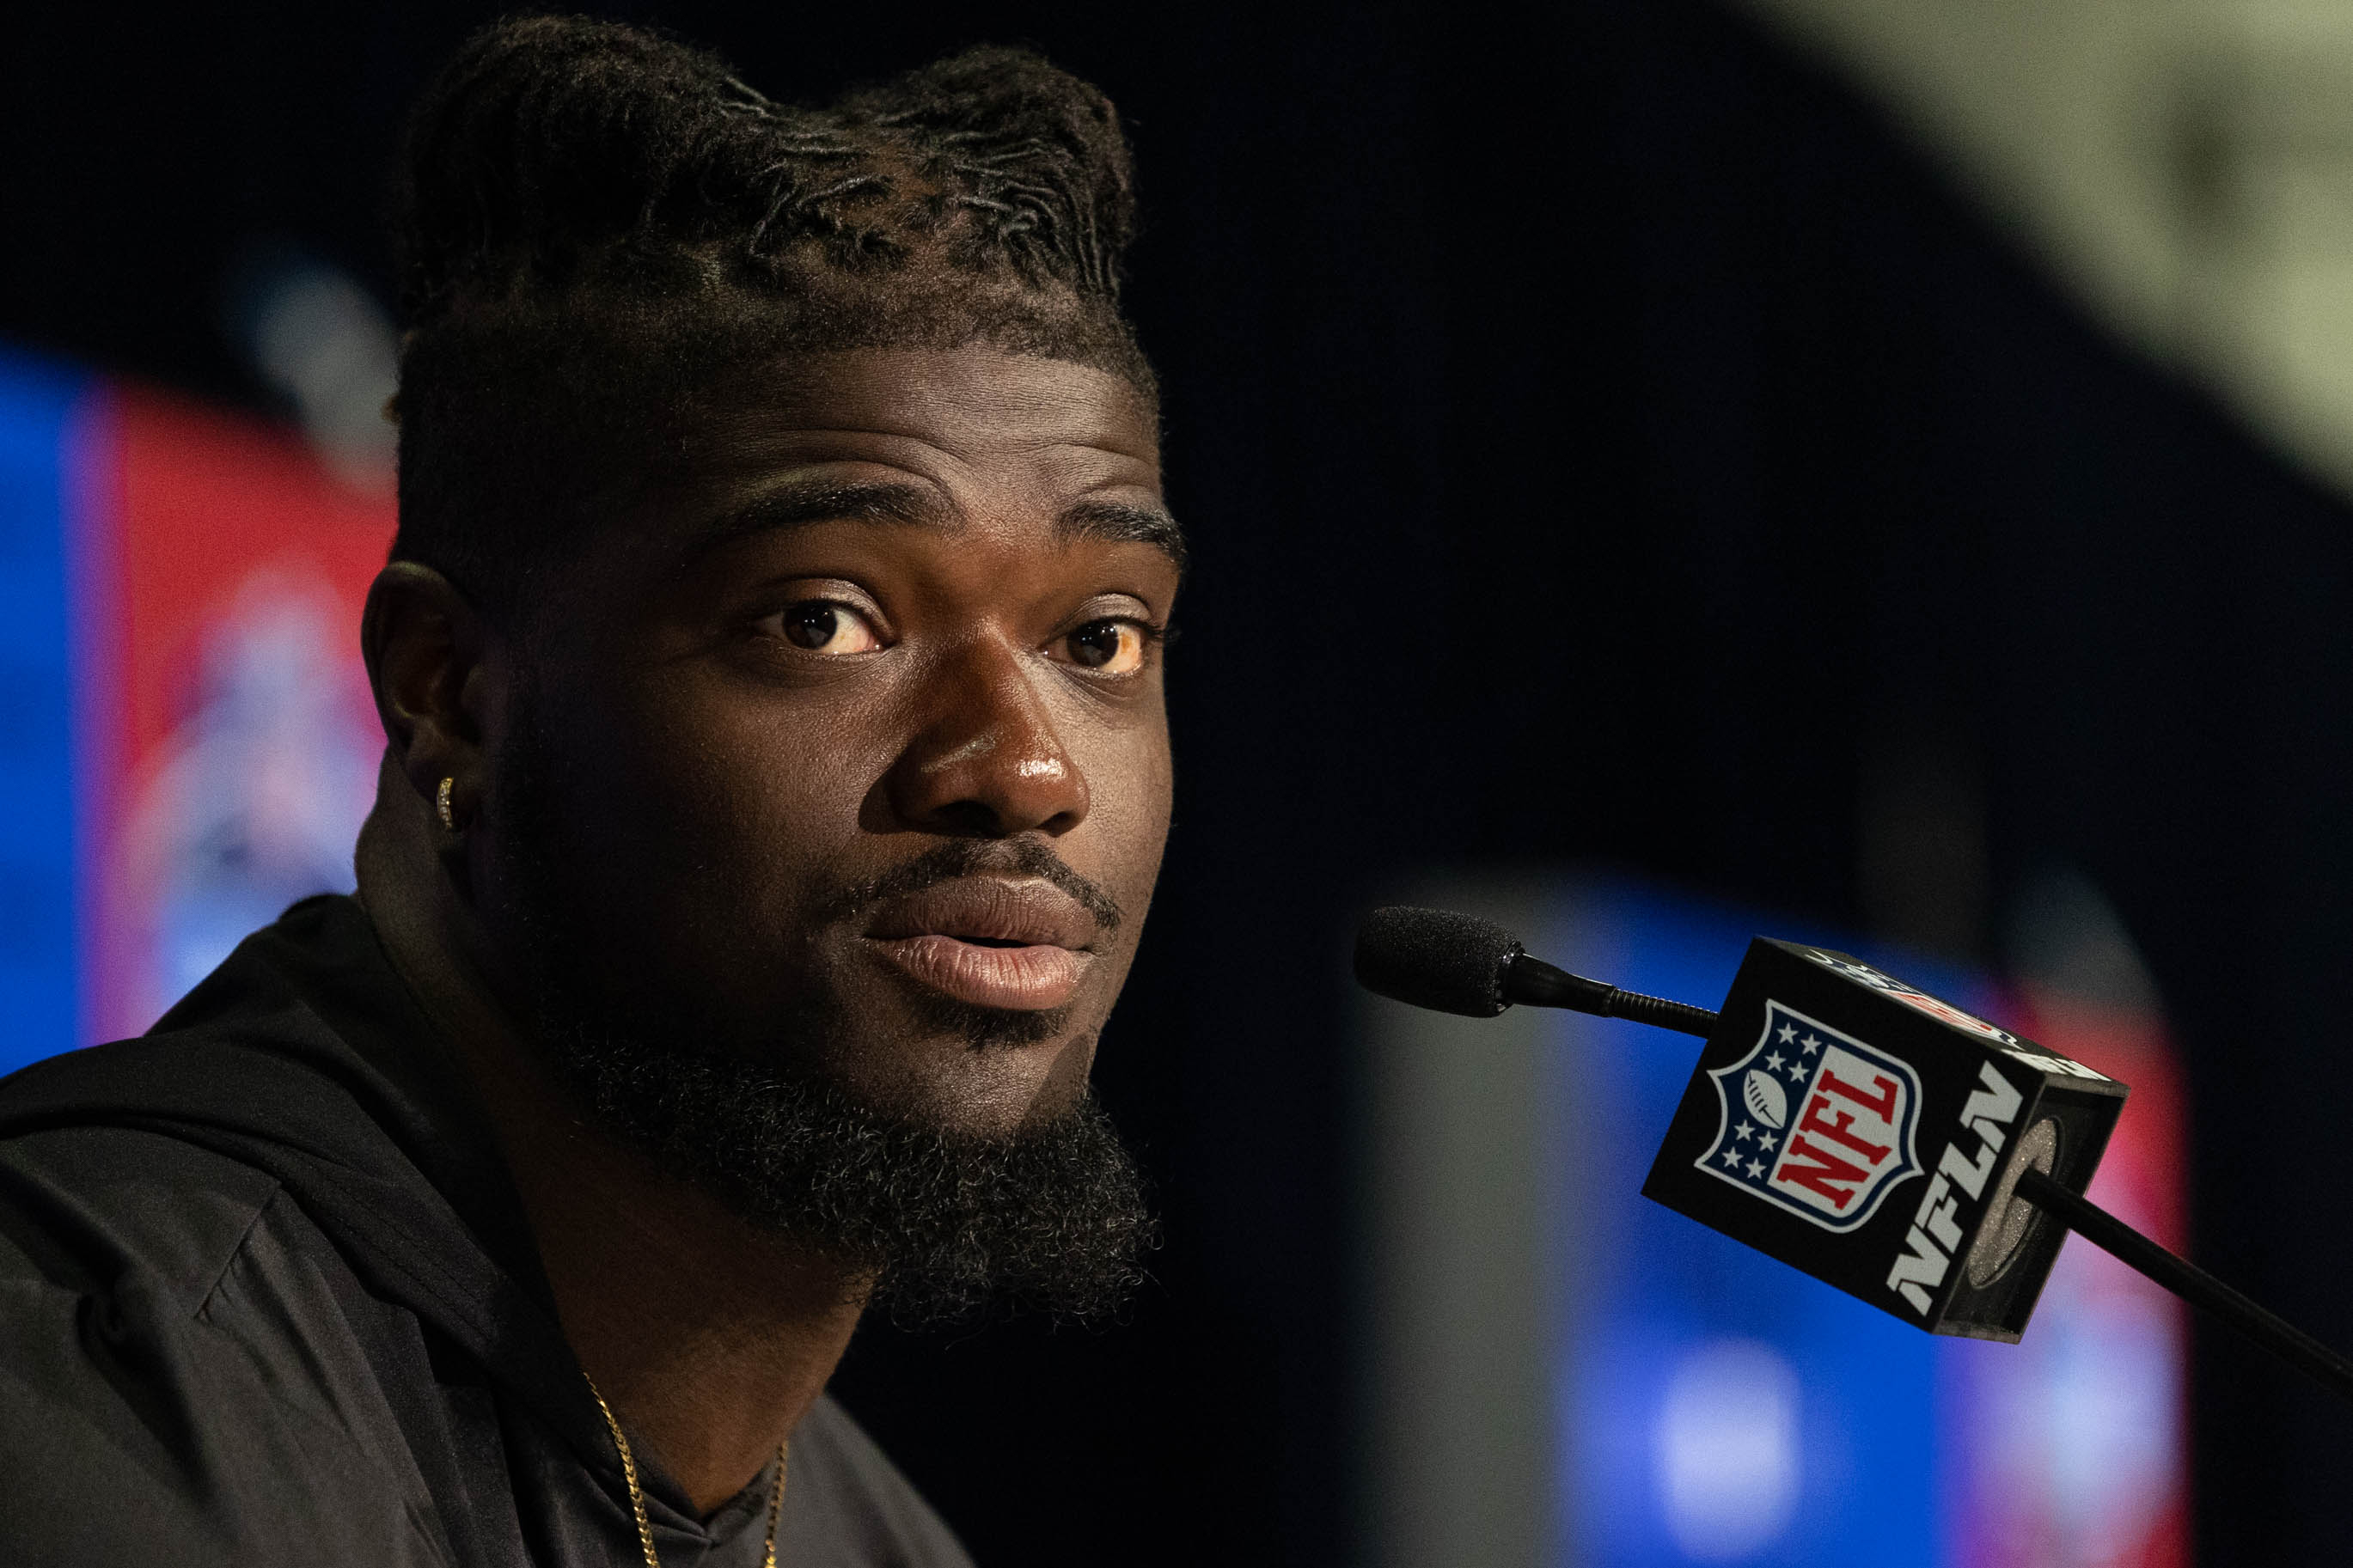 Mar 4, 2022; Indianapolis, IN, USA; Michigan defensive lineman David Ojabo (DL36) talks to the media during the 2022 NFL Combine. Mandatory Credit: Trevor Ruszkowski-USA TODAY Sports